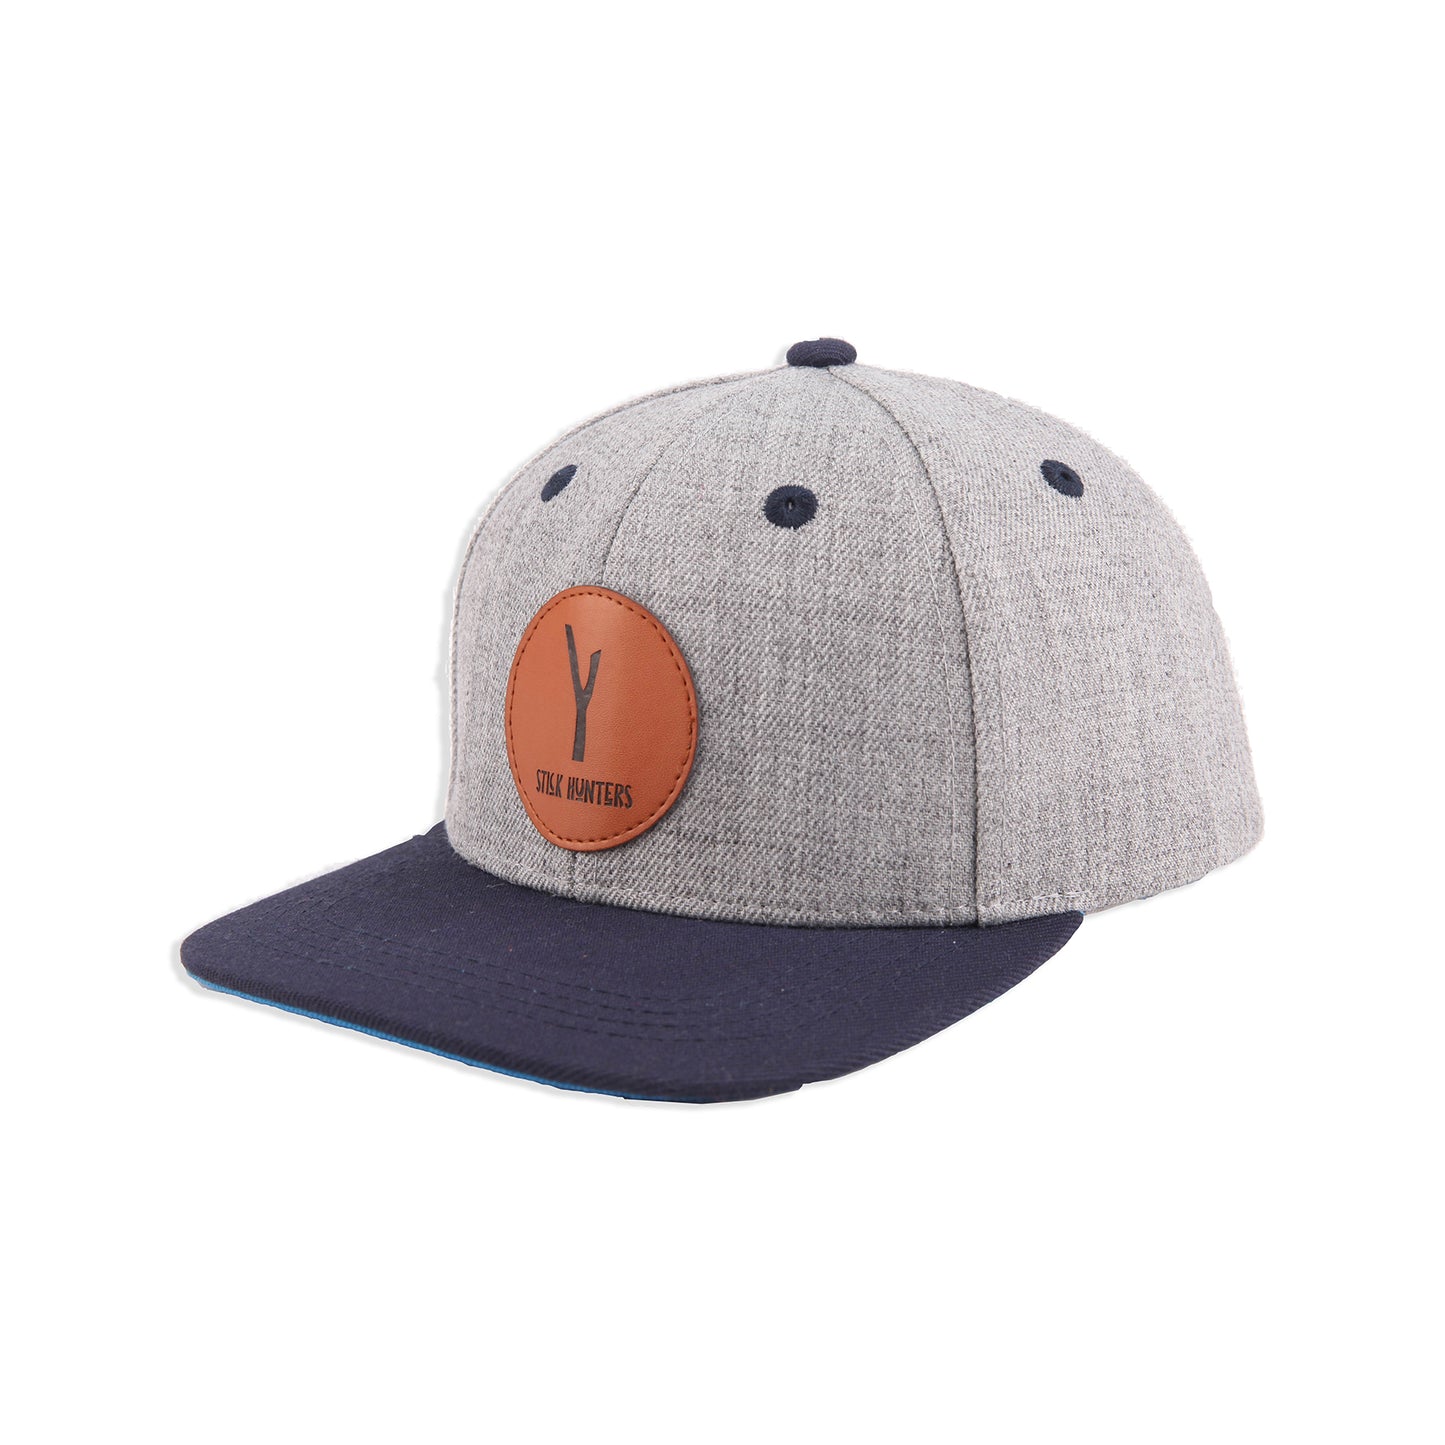 TODDLER AND KIDS SNAPBACK HAT - GREY AND BLUE